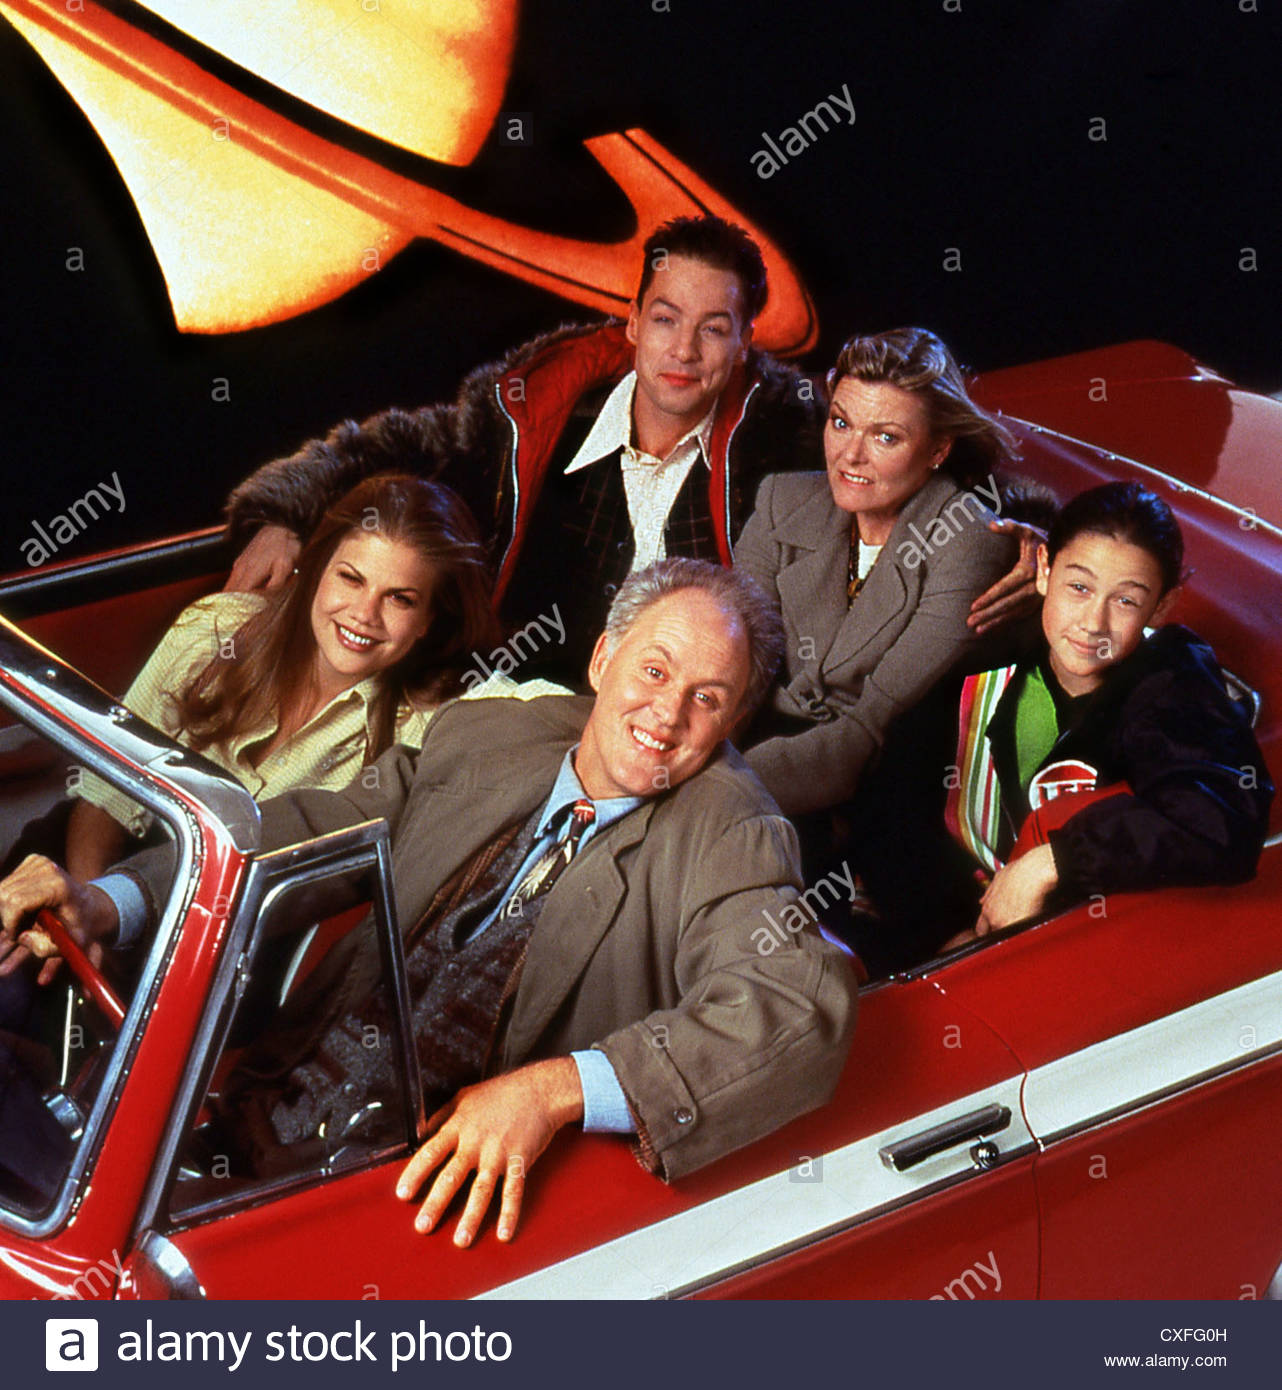 3rd Rock From The Sun Pics, TV Show Collection